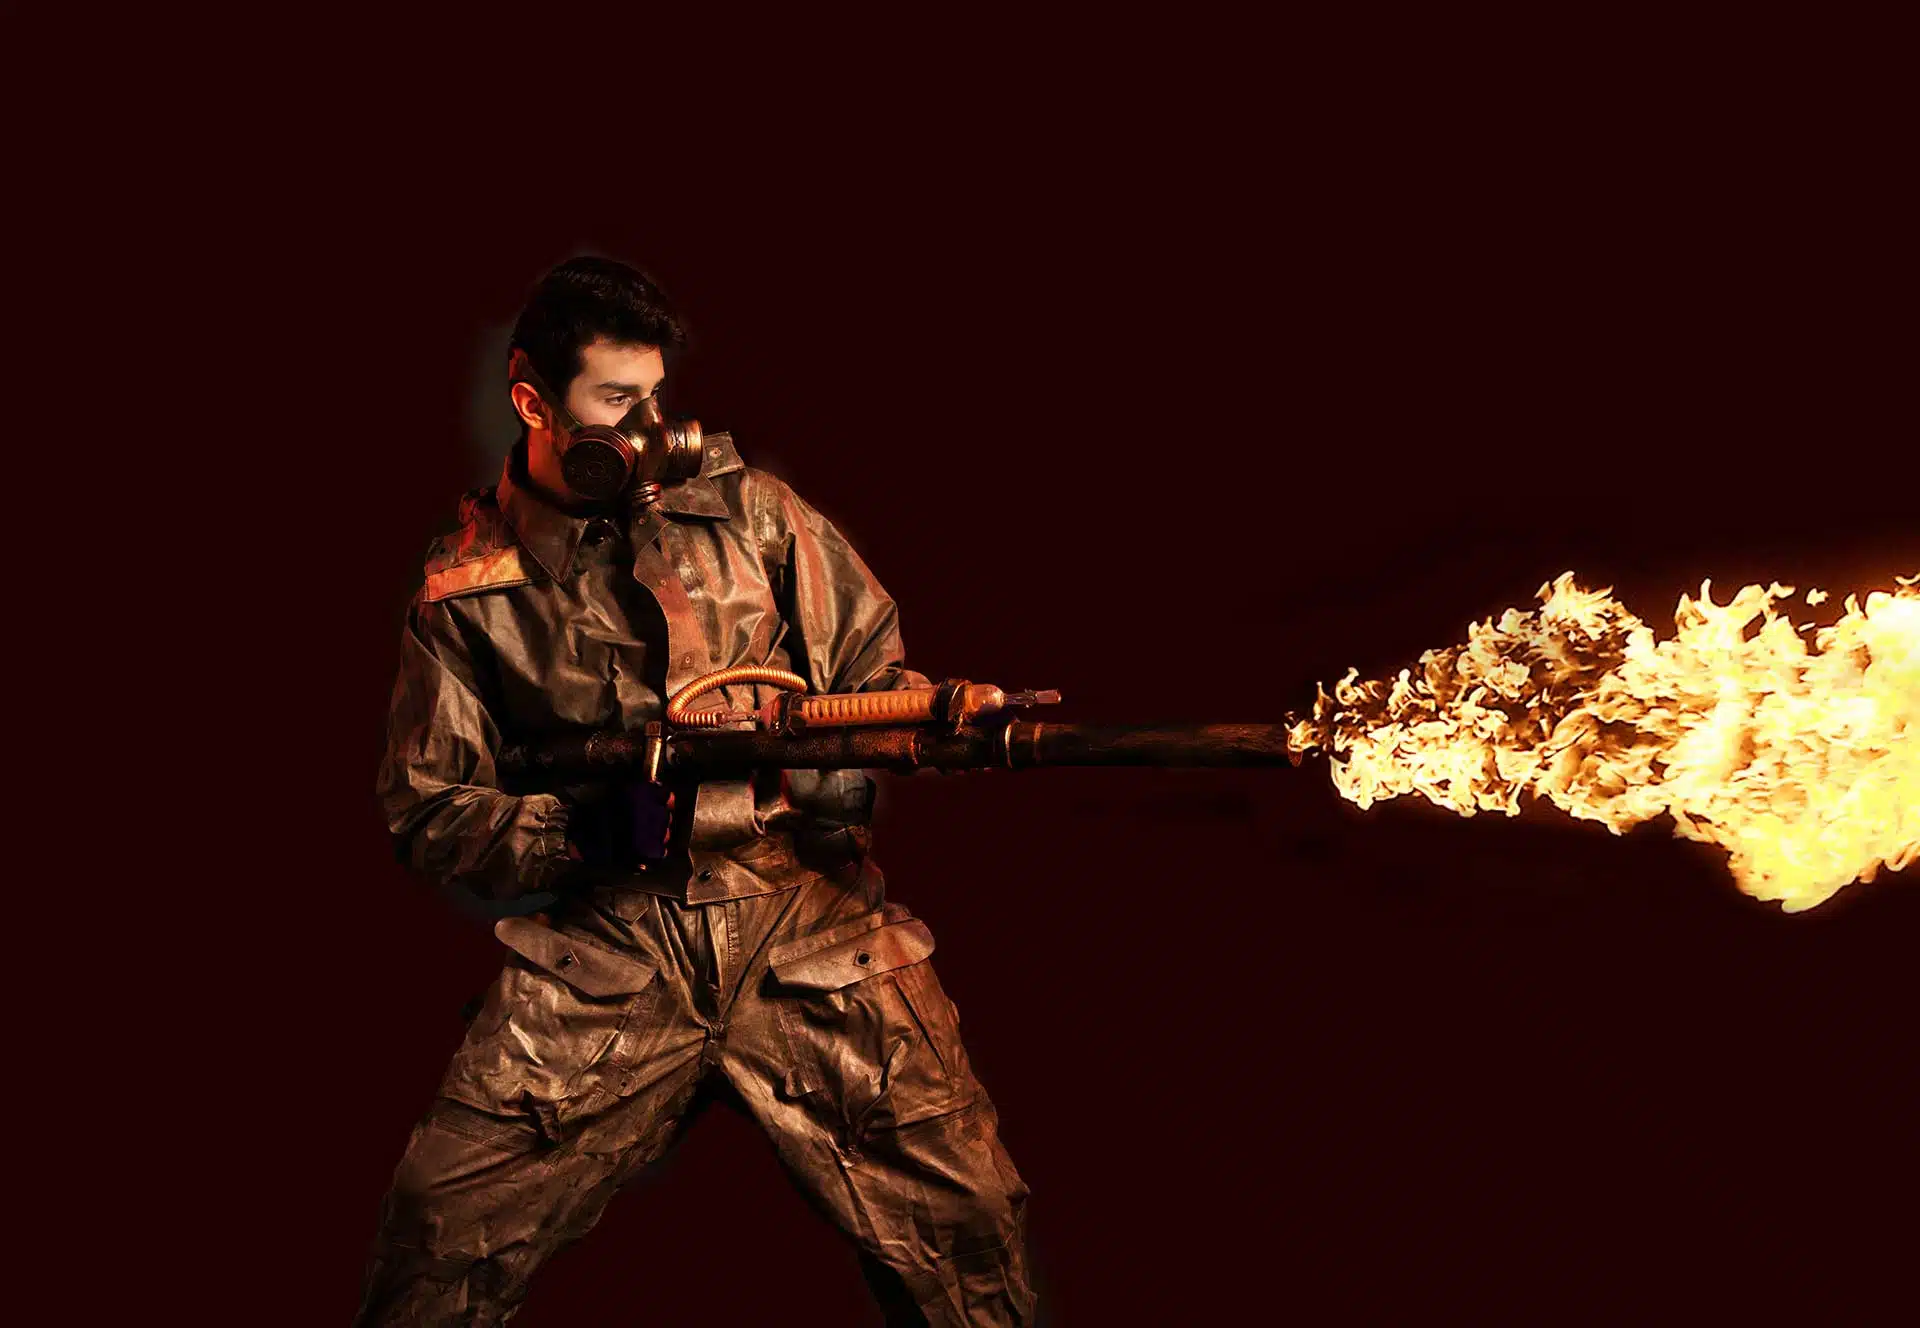 Flamethrowers You Can Buy and Flamethrowers You Can Make